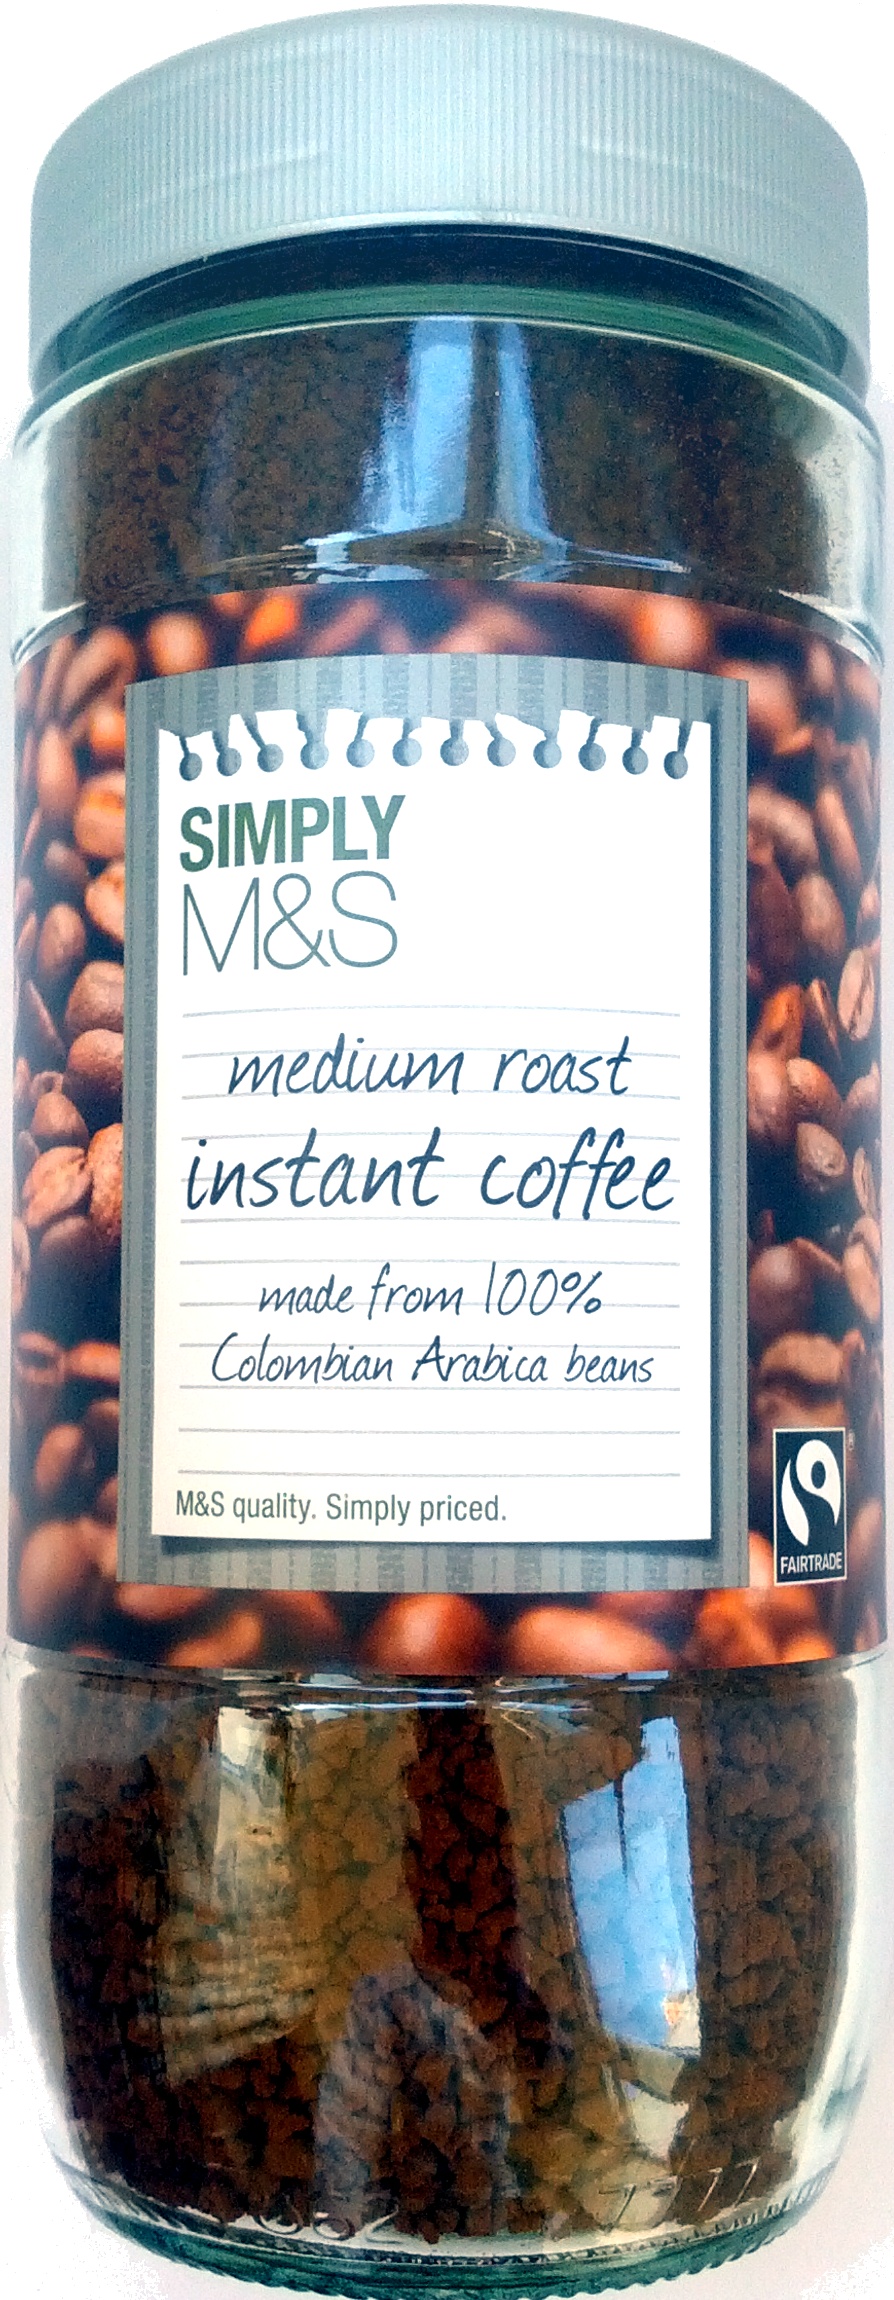 medium roast instant coffee made from 100% colombian arabica beans - Product